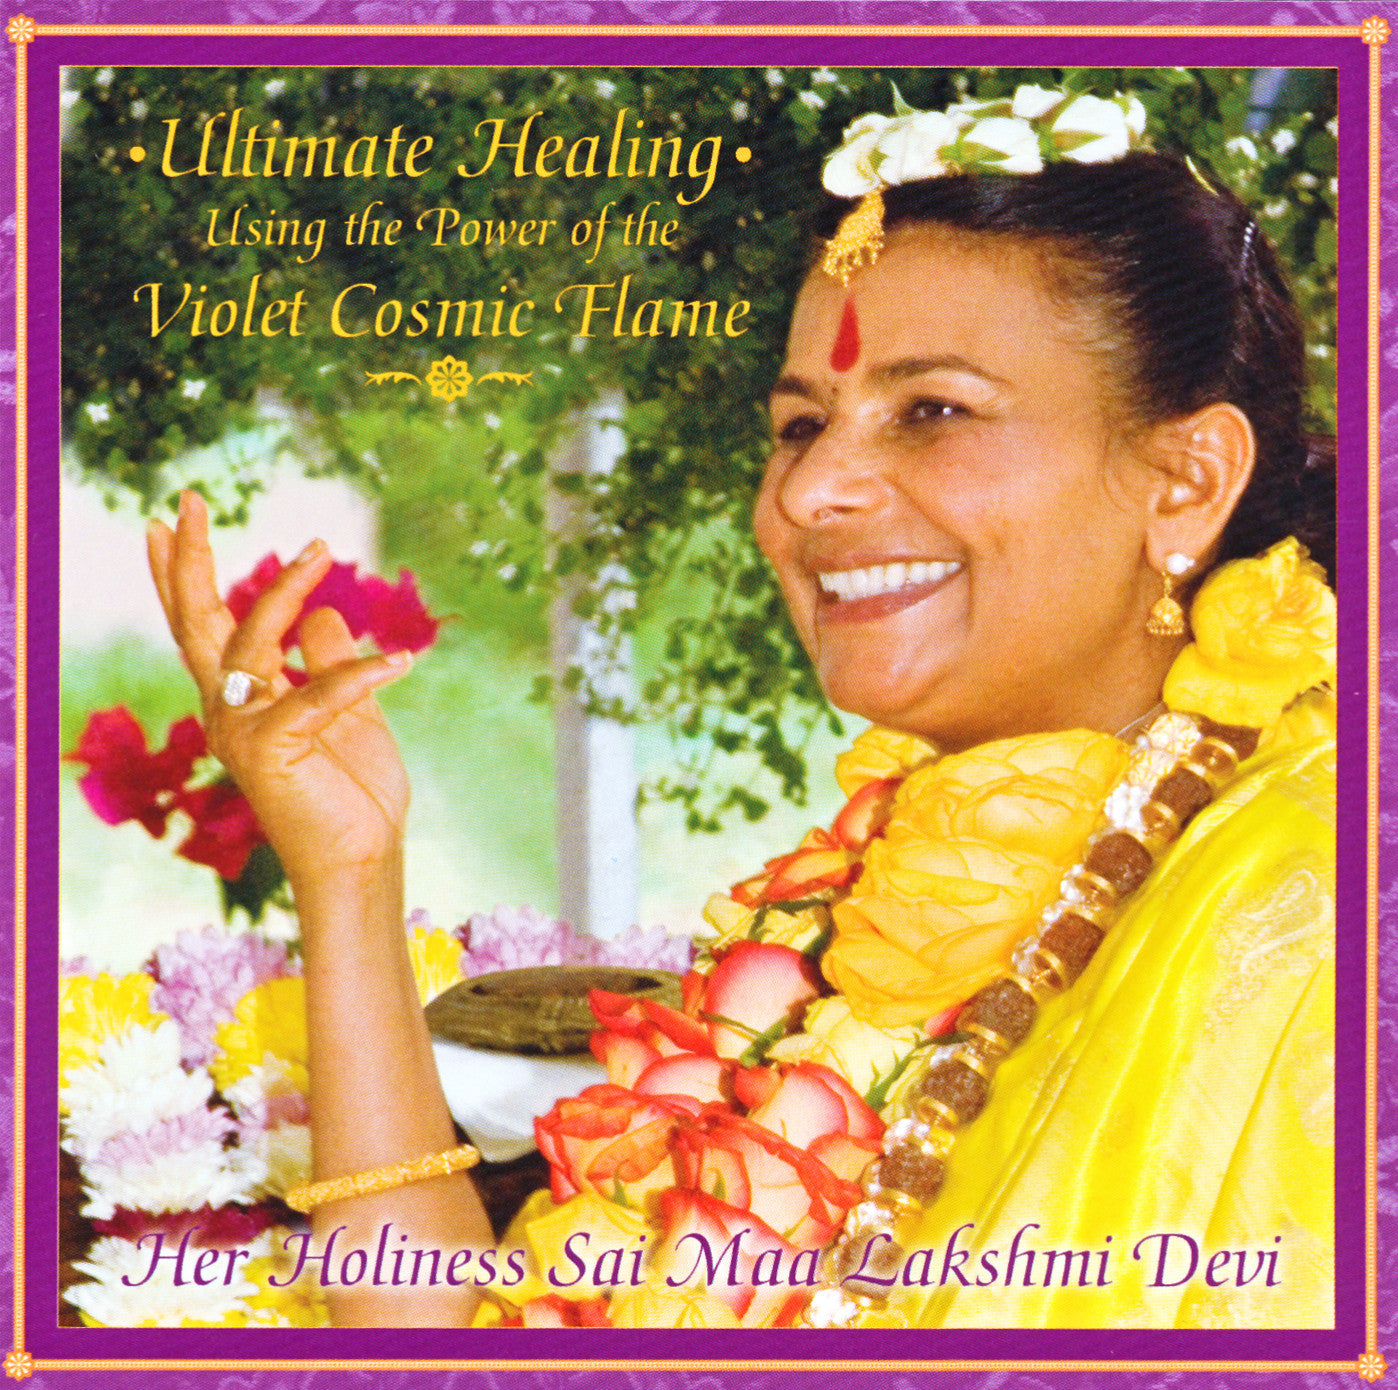 Ultimate Healing: Using the Power of the Violet Cosmic Flame